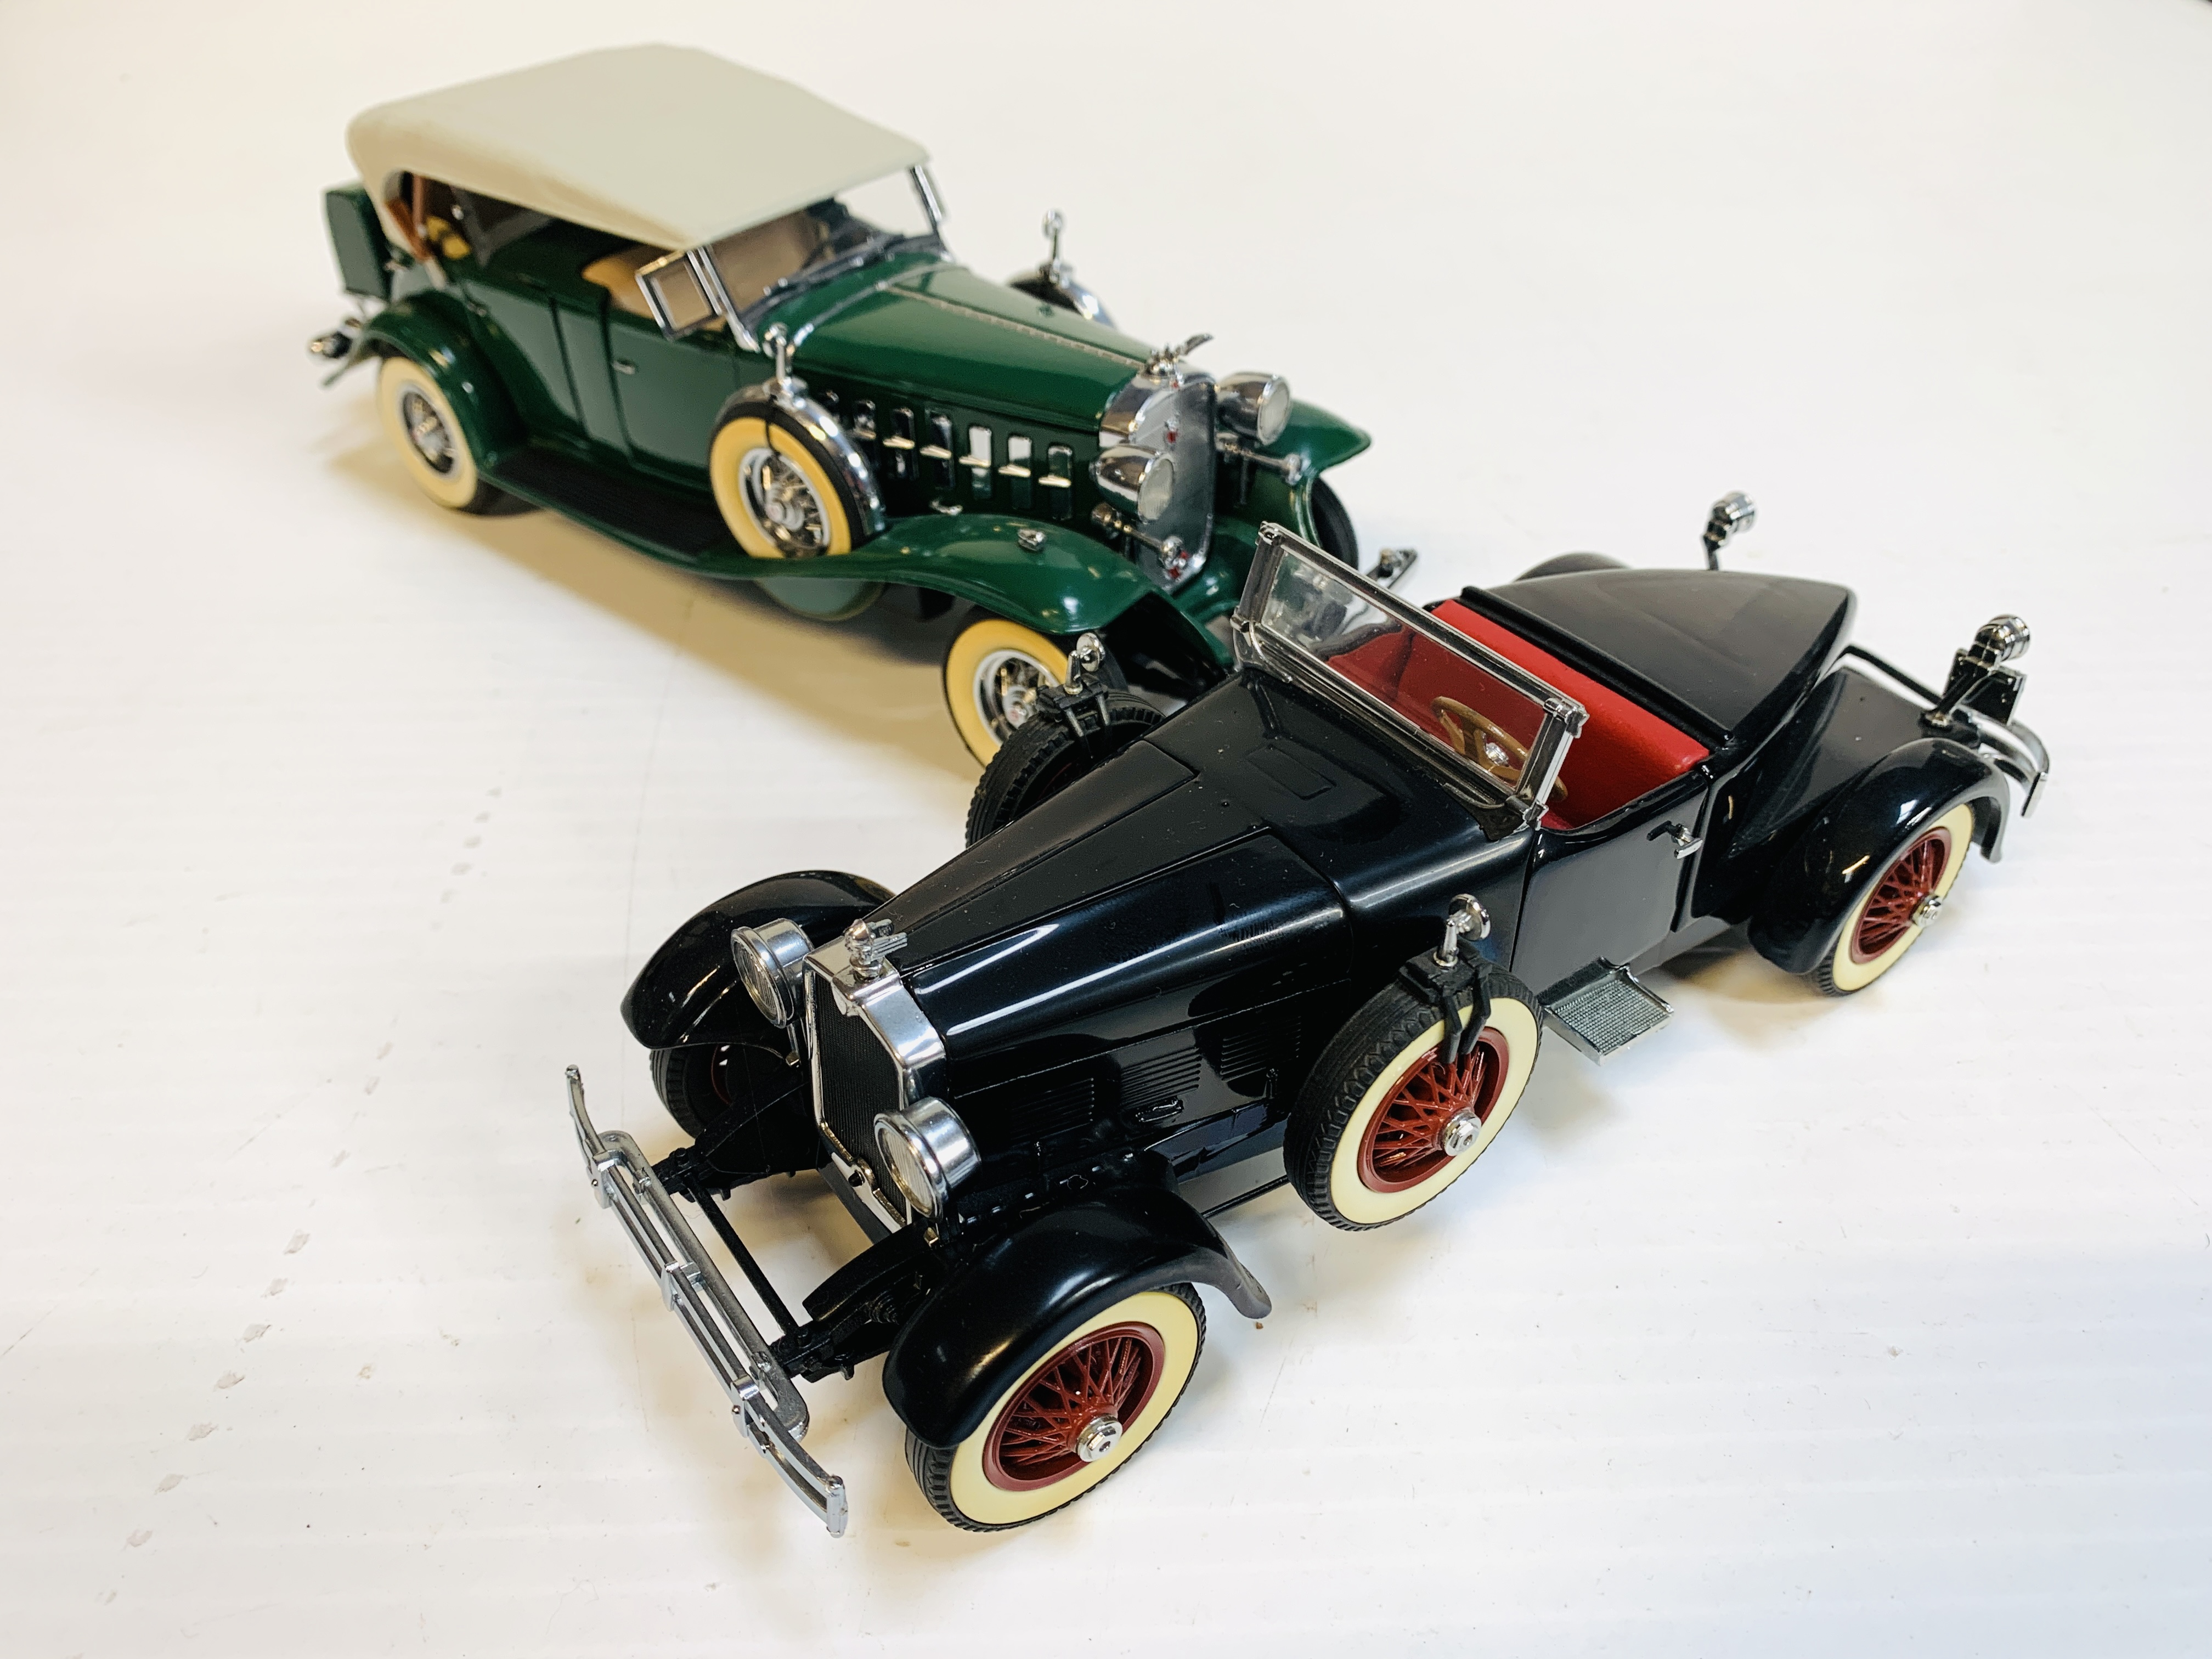 1932 Cadillac V16 together with a 1927 Stutz Blackhawk